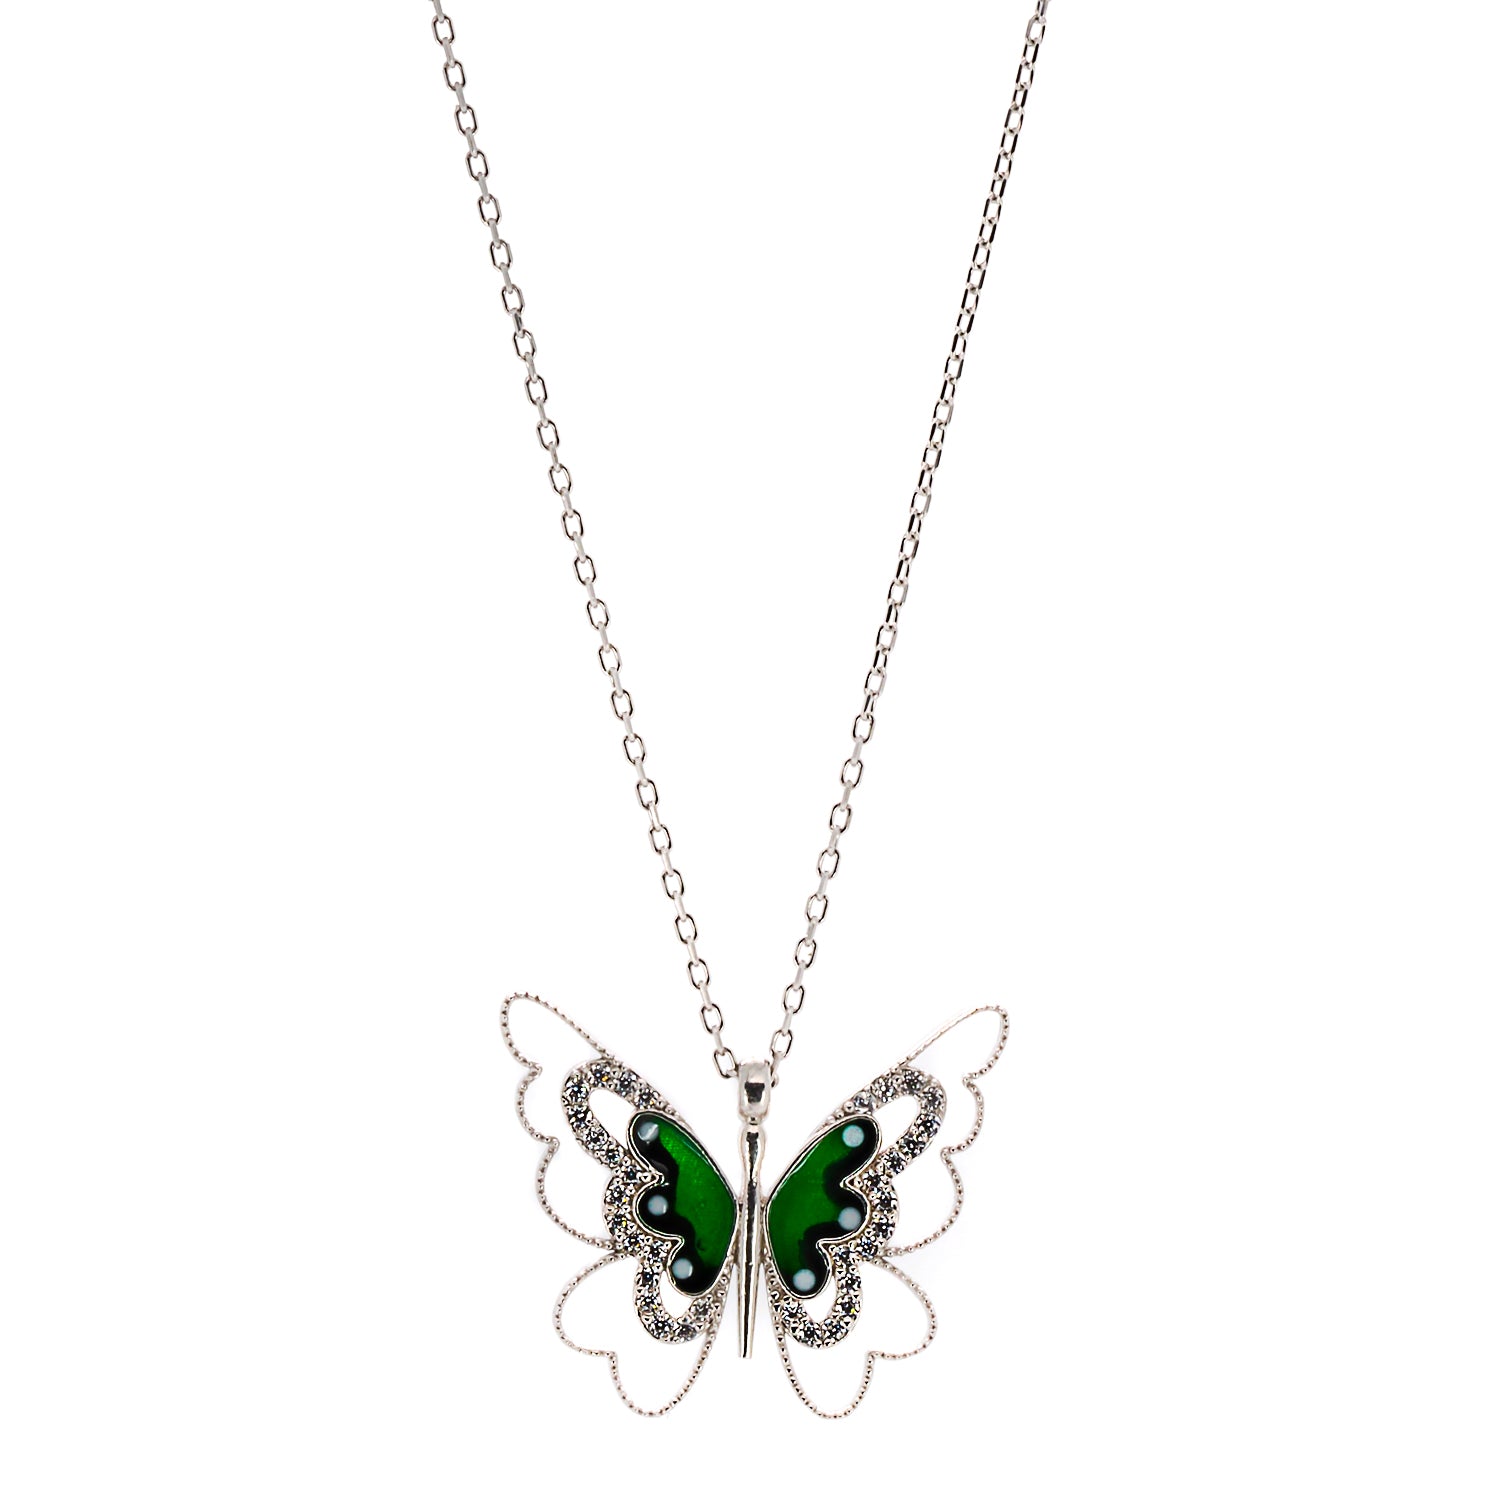 A close-up of the intricate green and black enamel design on the Abundance Green Butterfly Necklace.